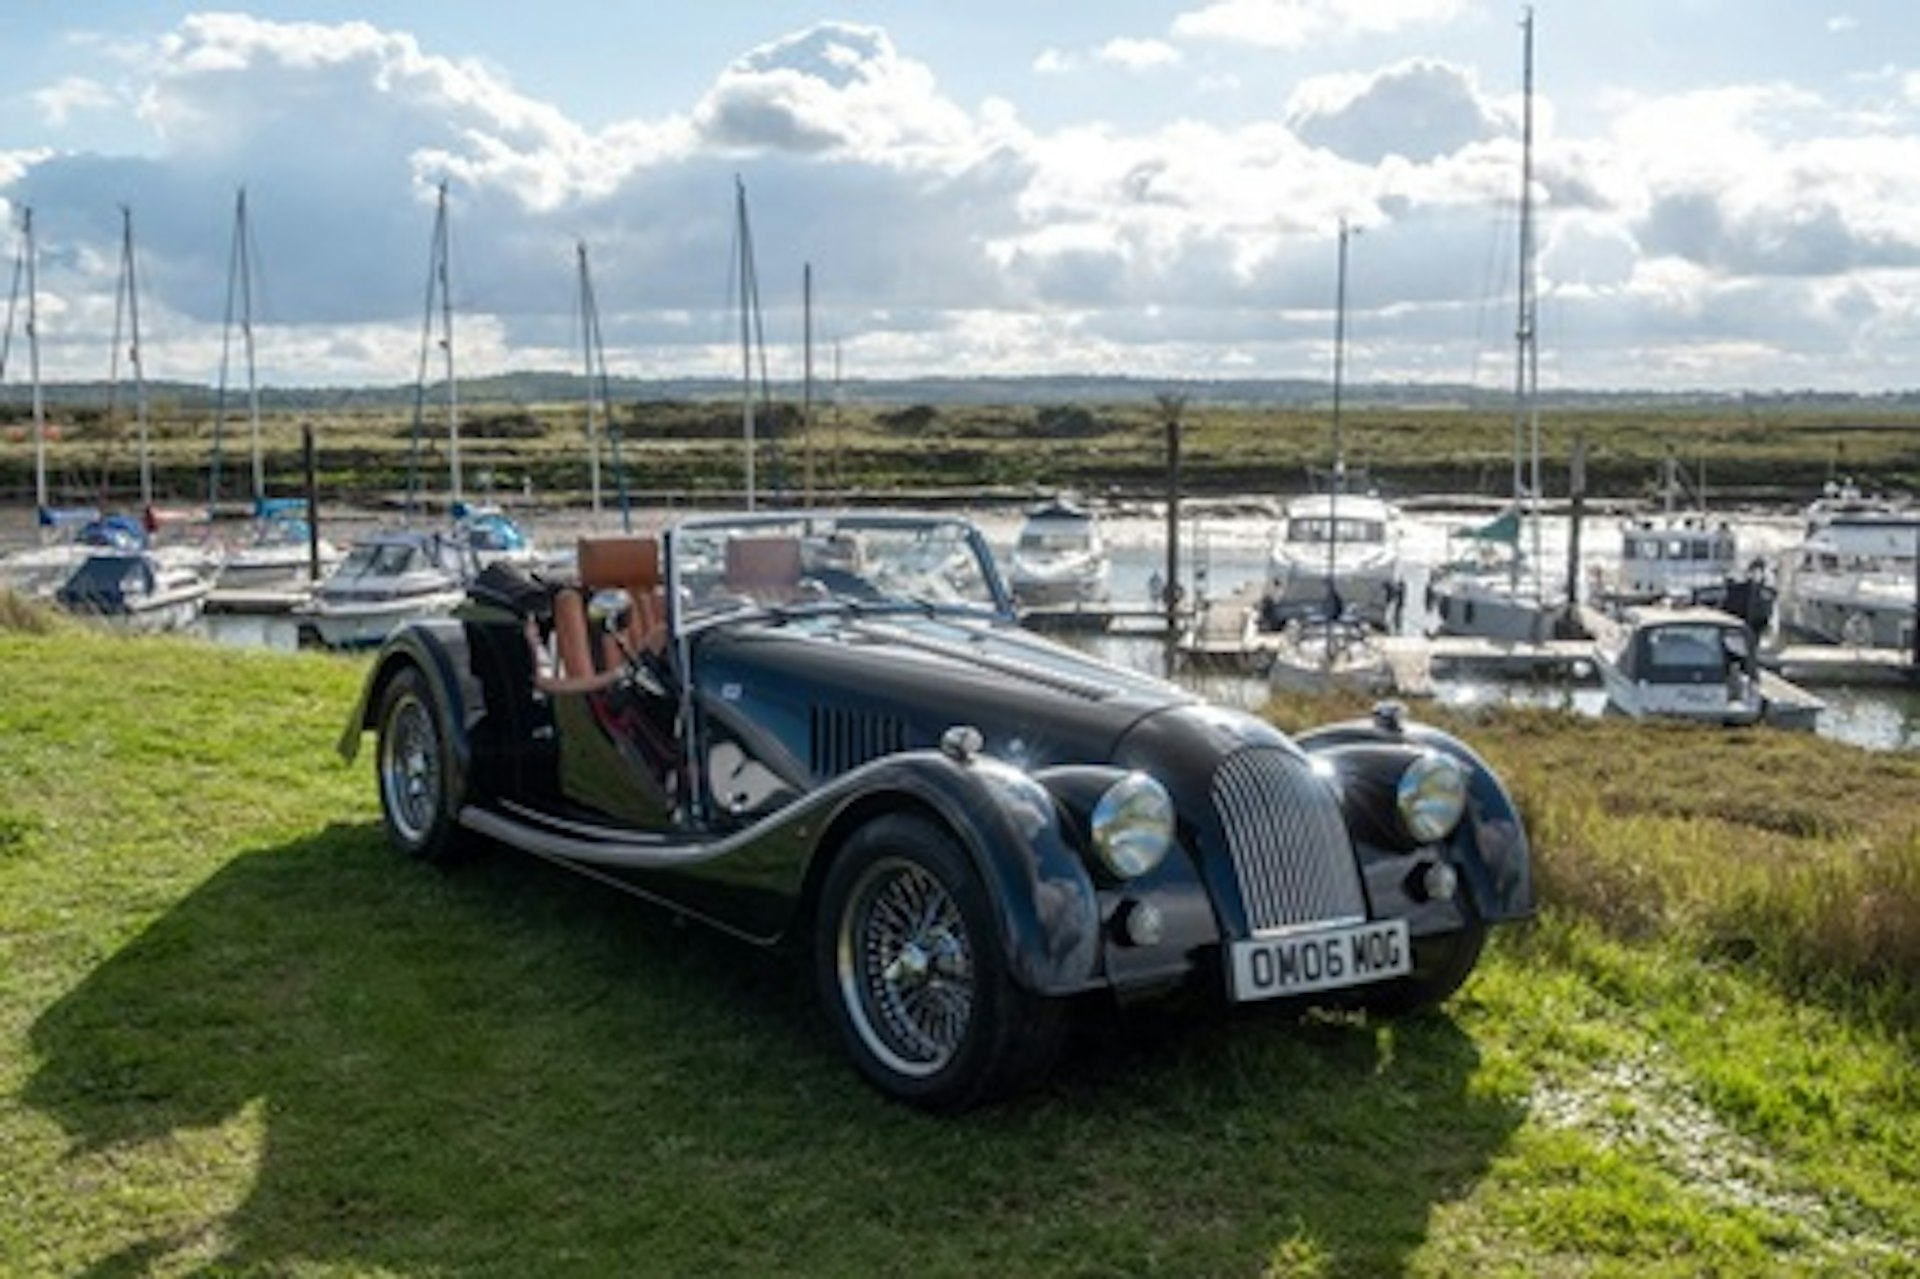 Morgan Roadster V6 Classic Car On Road Driving Experience - Weekday 1